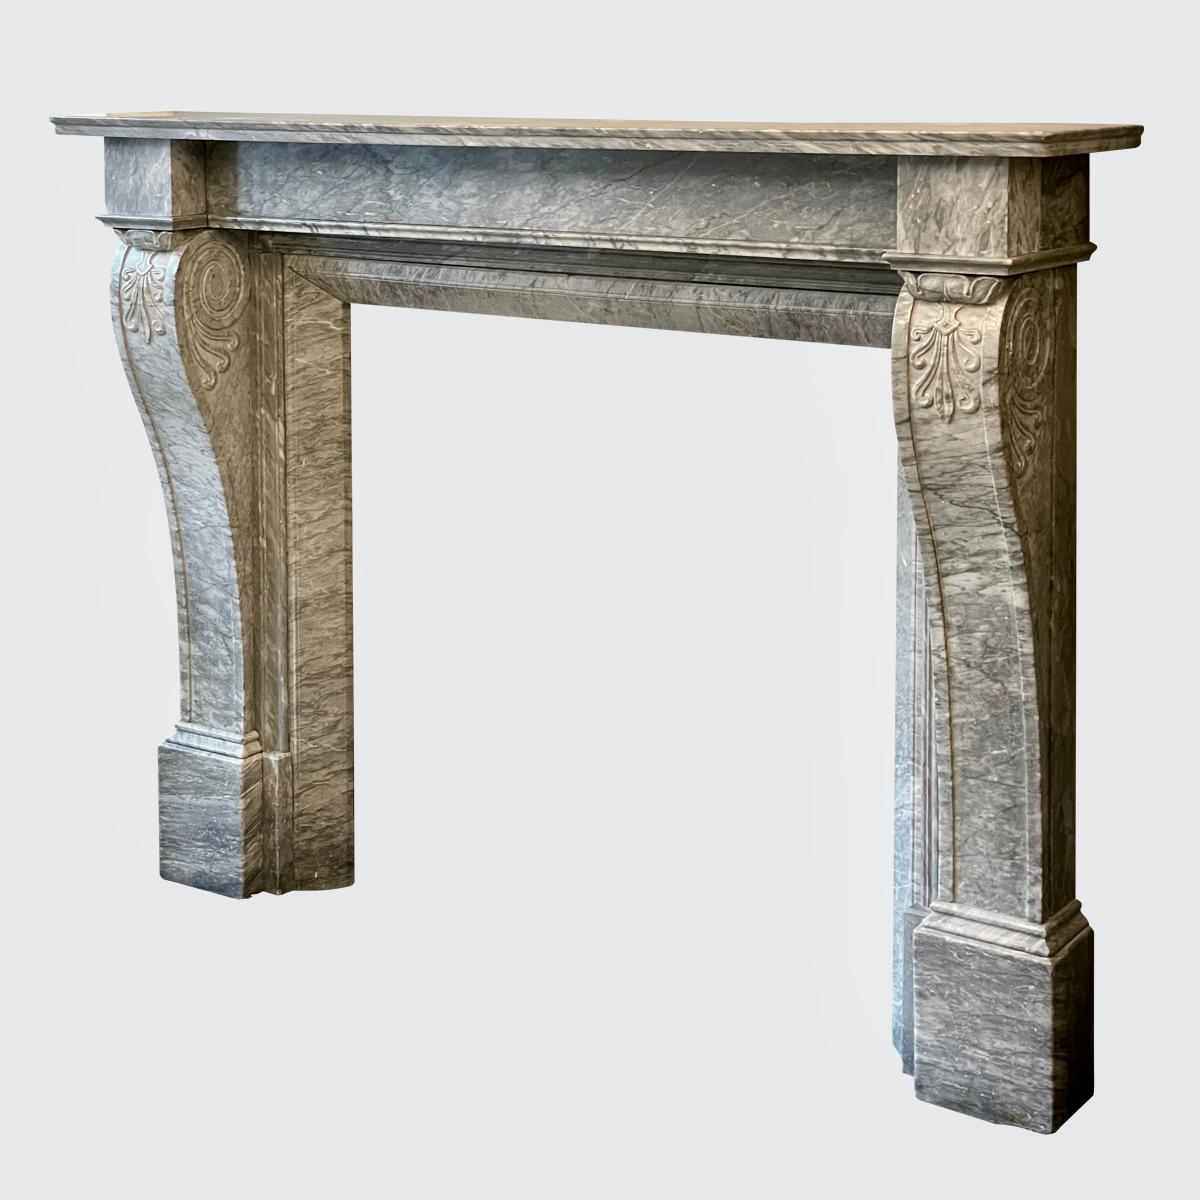 A well drawn and superb quality English Regency fireplace in Italian Bardiglio marble. The paneled console jambs with anthemion carving to front and scrolled anthemion carving to sides, supported on substantial foot blocks and capped with square end